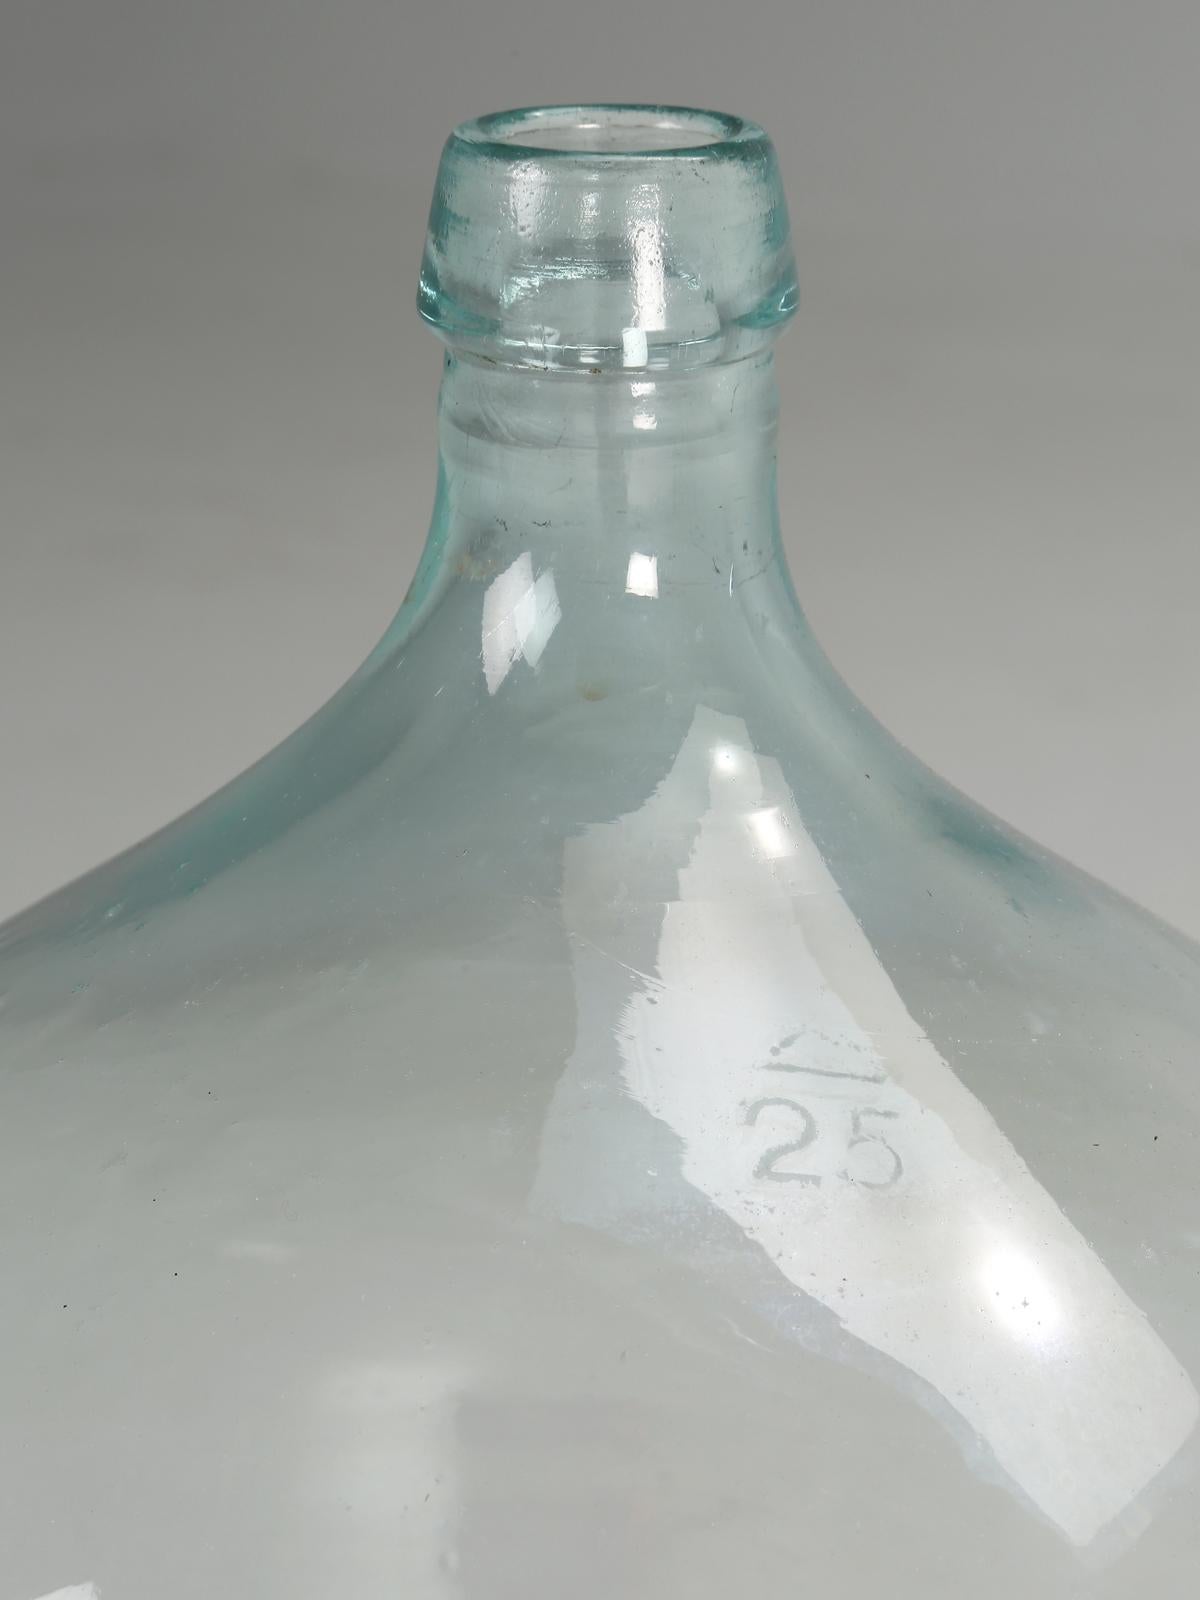 Early 20th Century Demijohn or Carboy Glass Vessel in the Original Wooden Carrying Crate For Sale